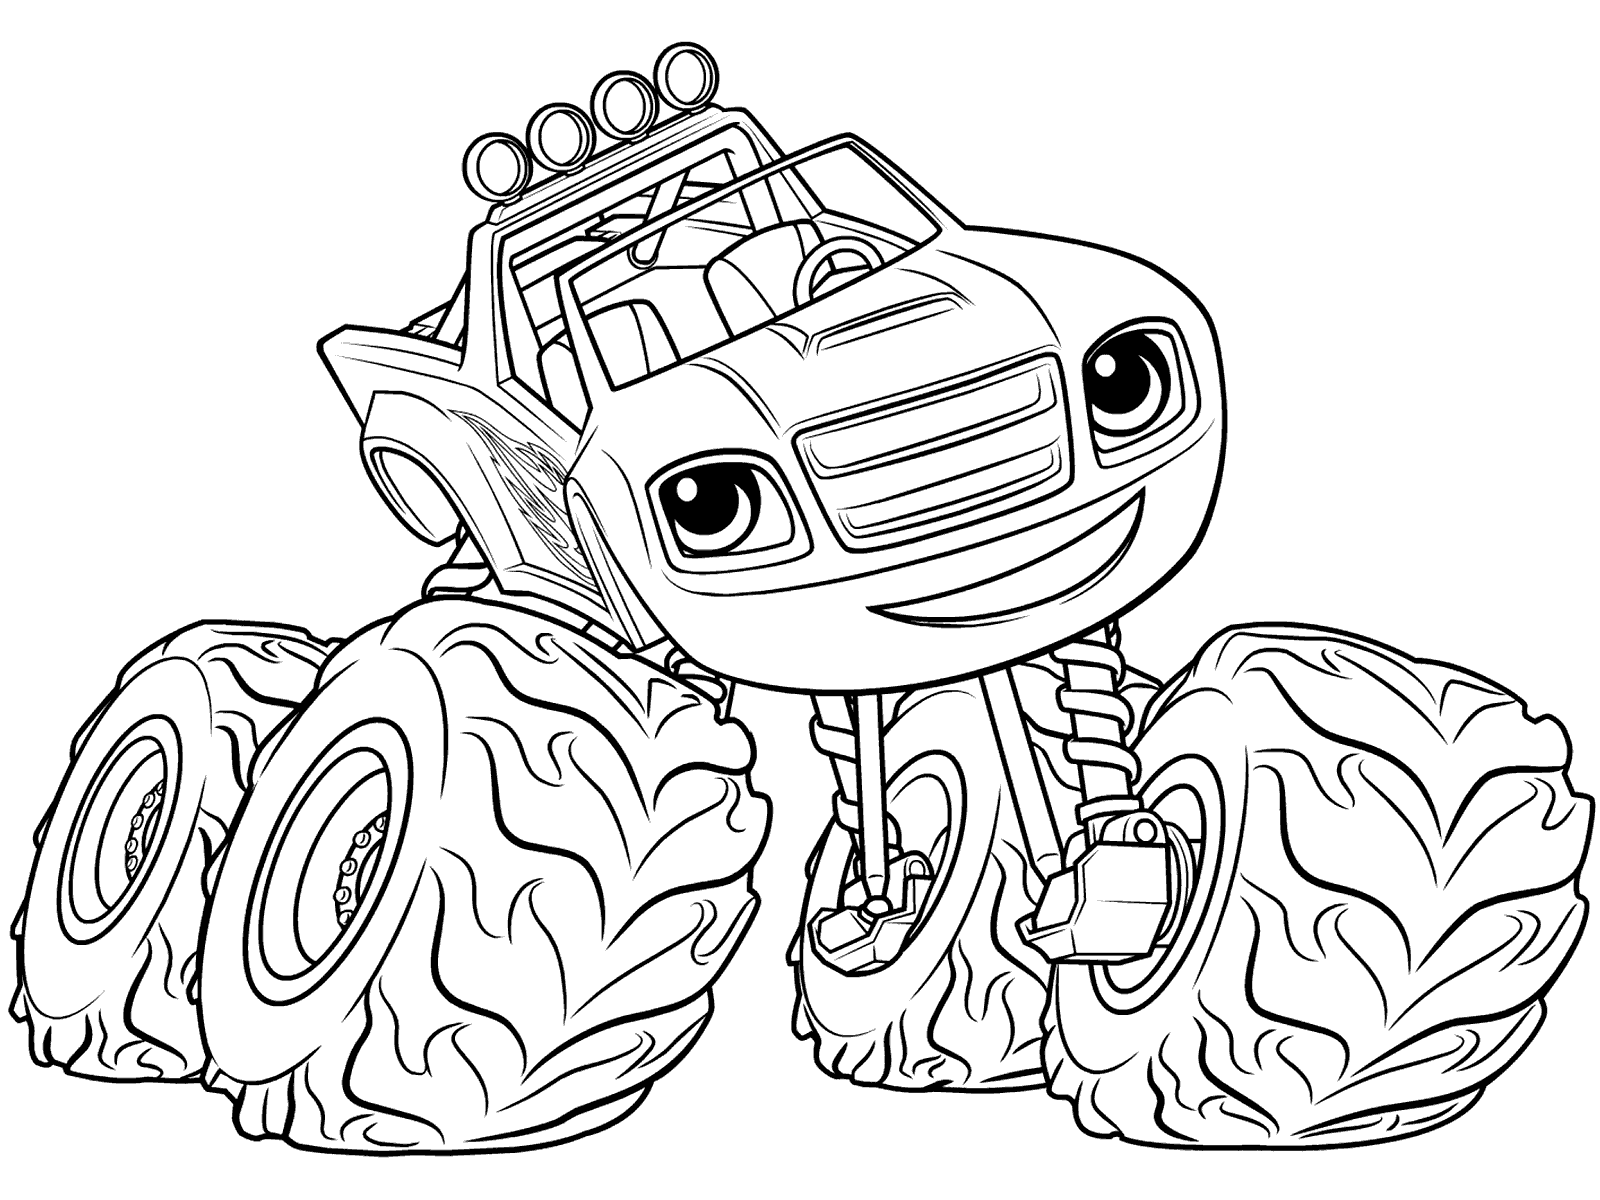 Blaze And The Monster Machines Coloring Pages To Print at GetDrawings ...